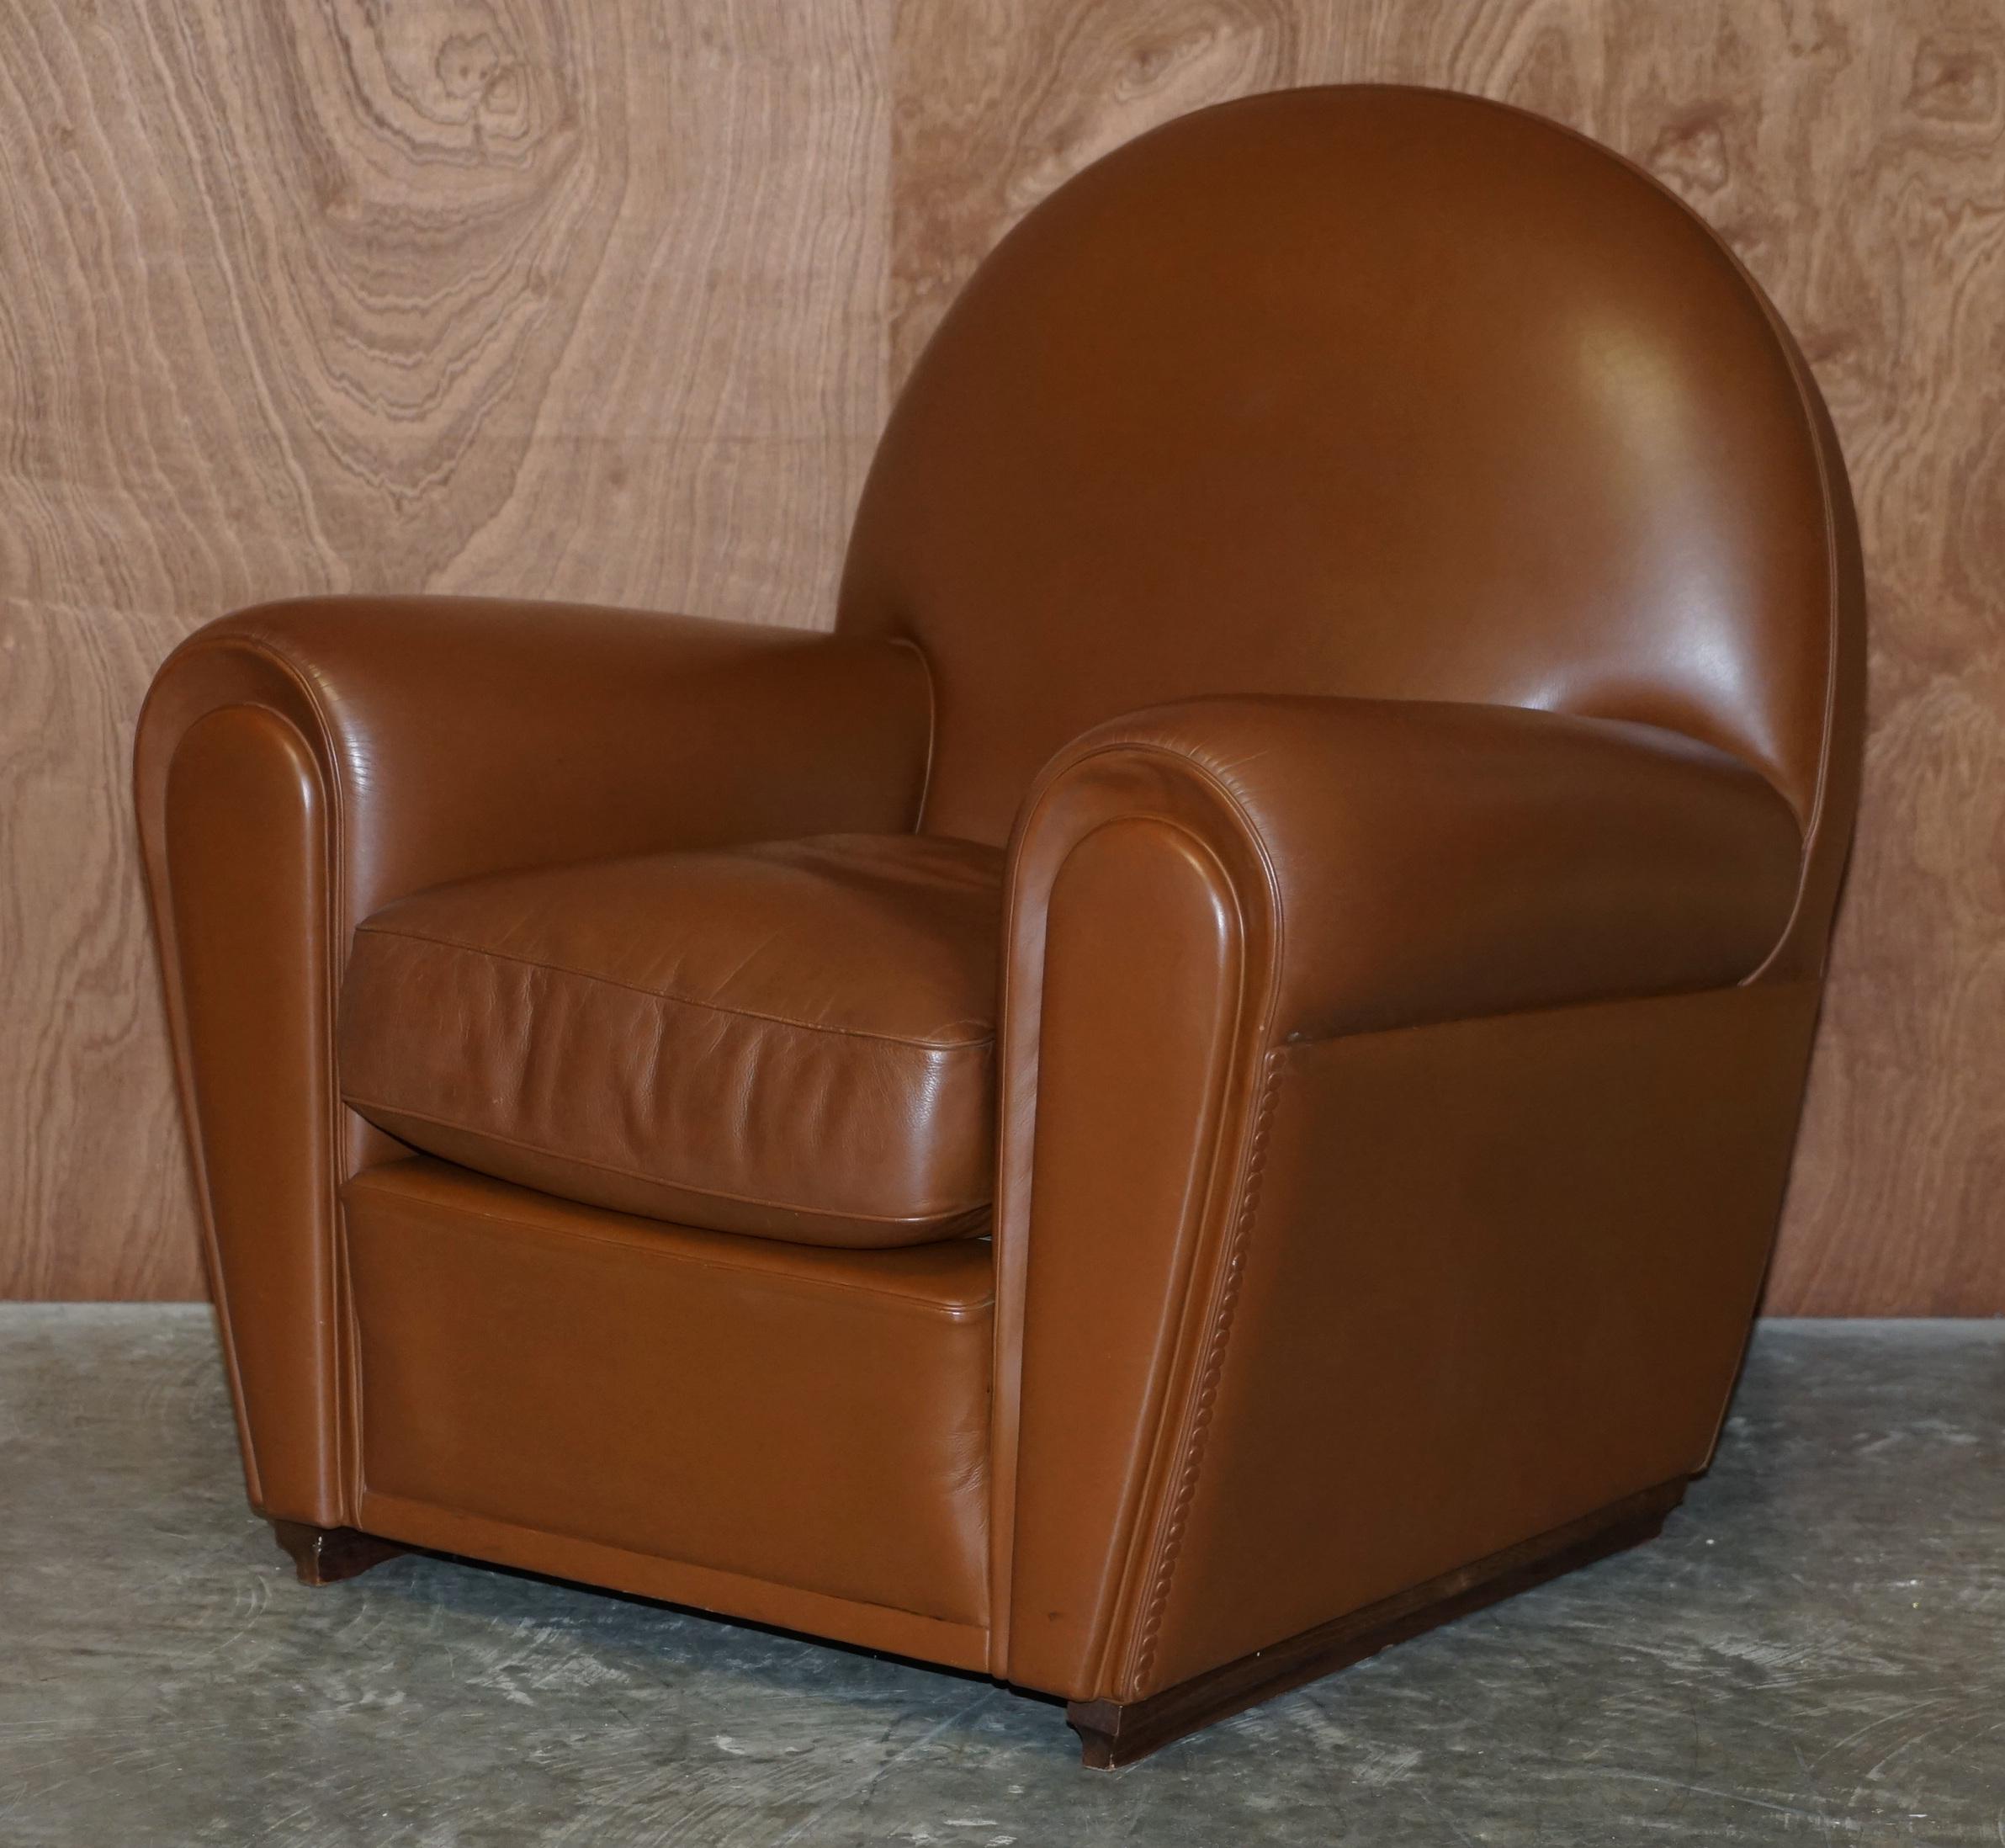 We are delighted to offer this stunning pair of Art Deco style Poltrona Frau Vanity Fair XC armchairs RRP £11,000

These are some of the most luxurious and well made armchairs I have ever seen. The leather is thick aniline, it is so silky soft, it